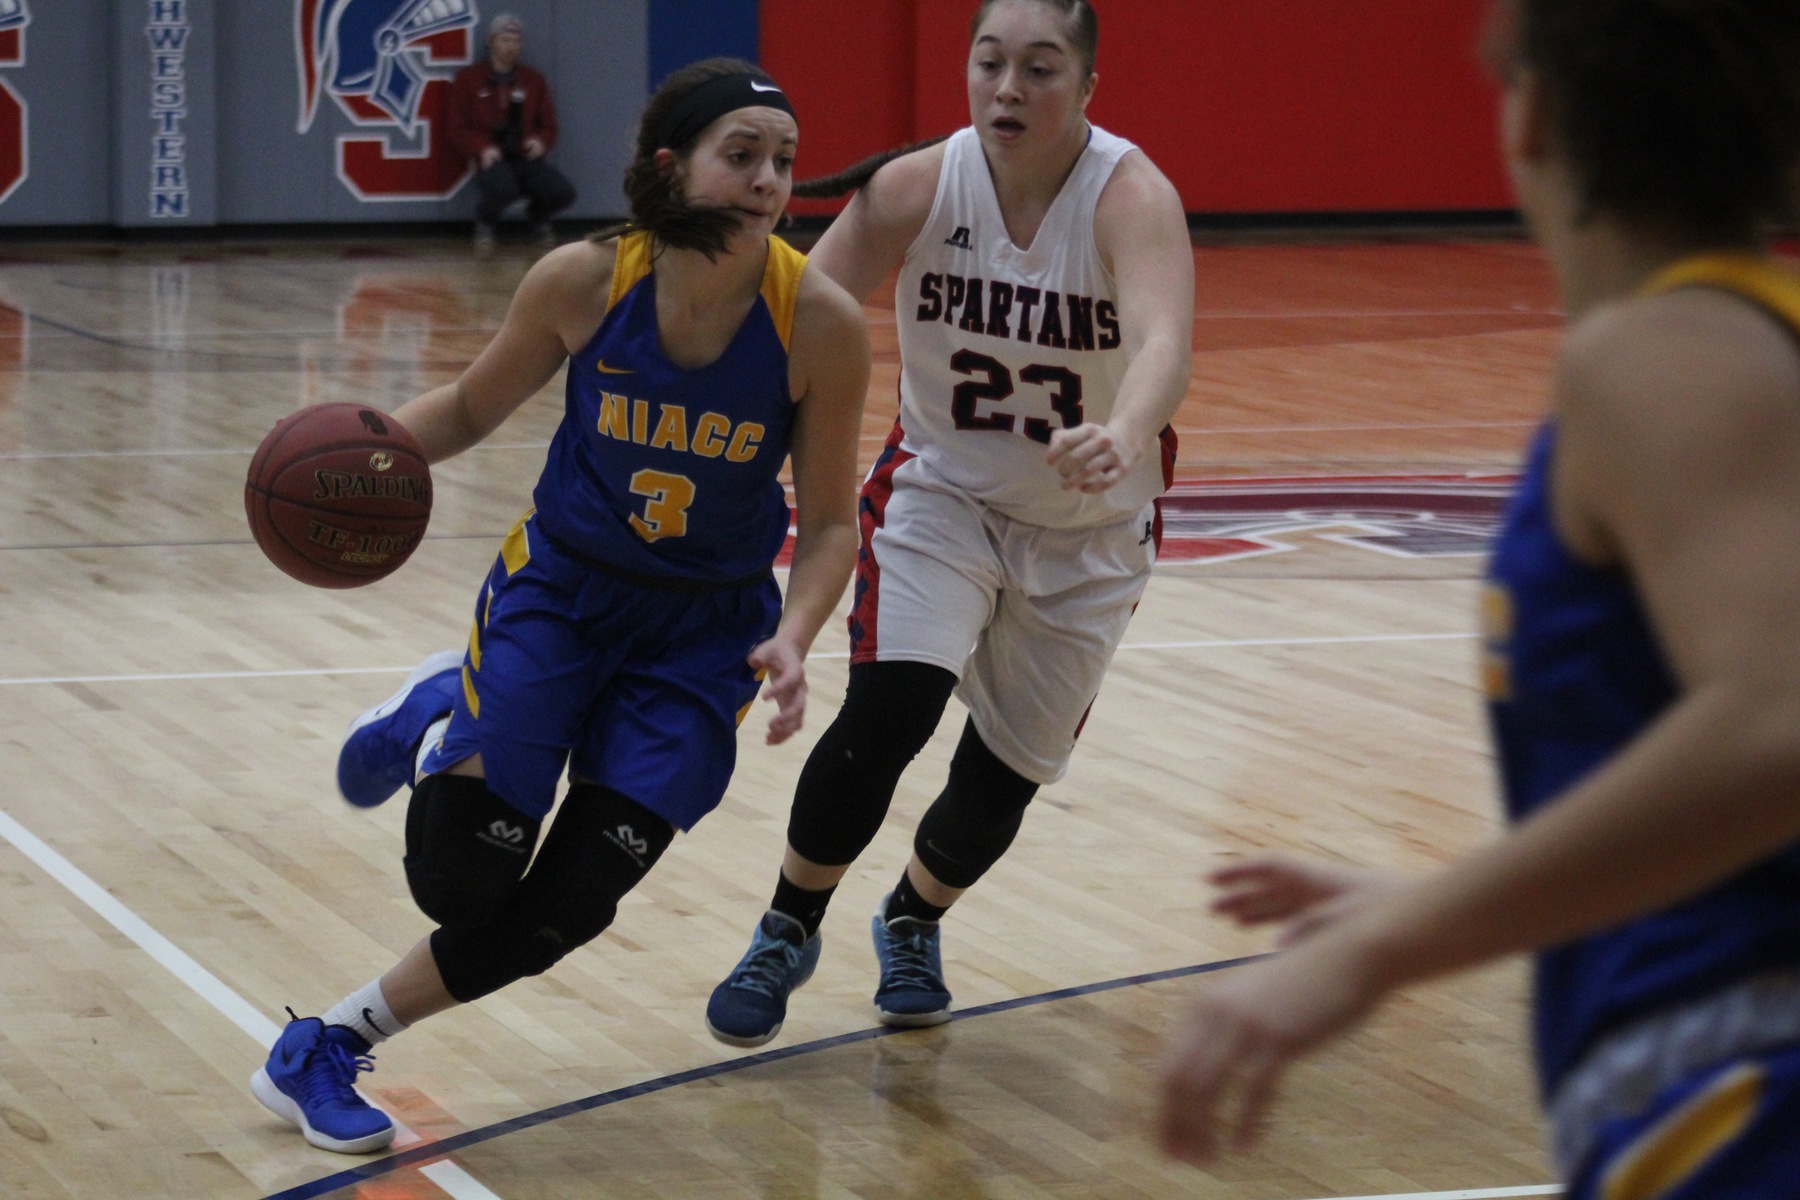 NIACC's Mandy Willems drives to the basket in Saturday's ICCAC contest against Southwestern.